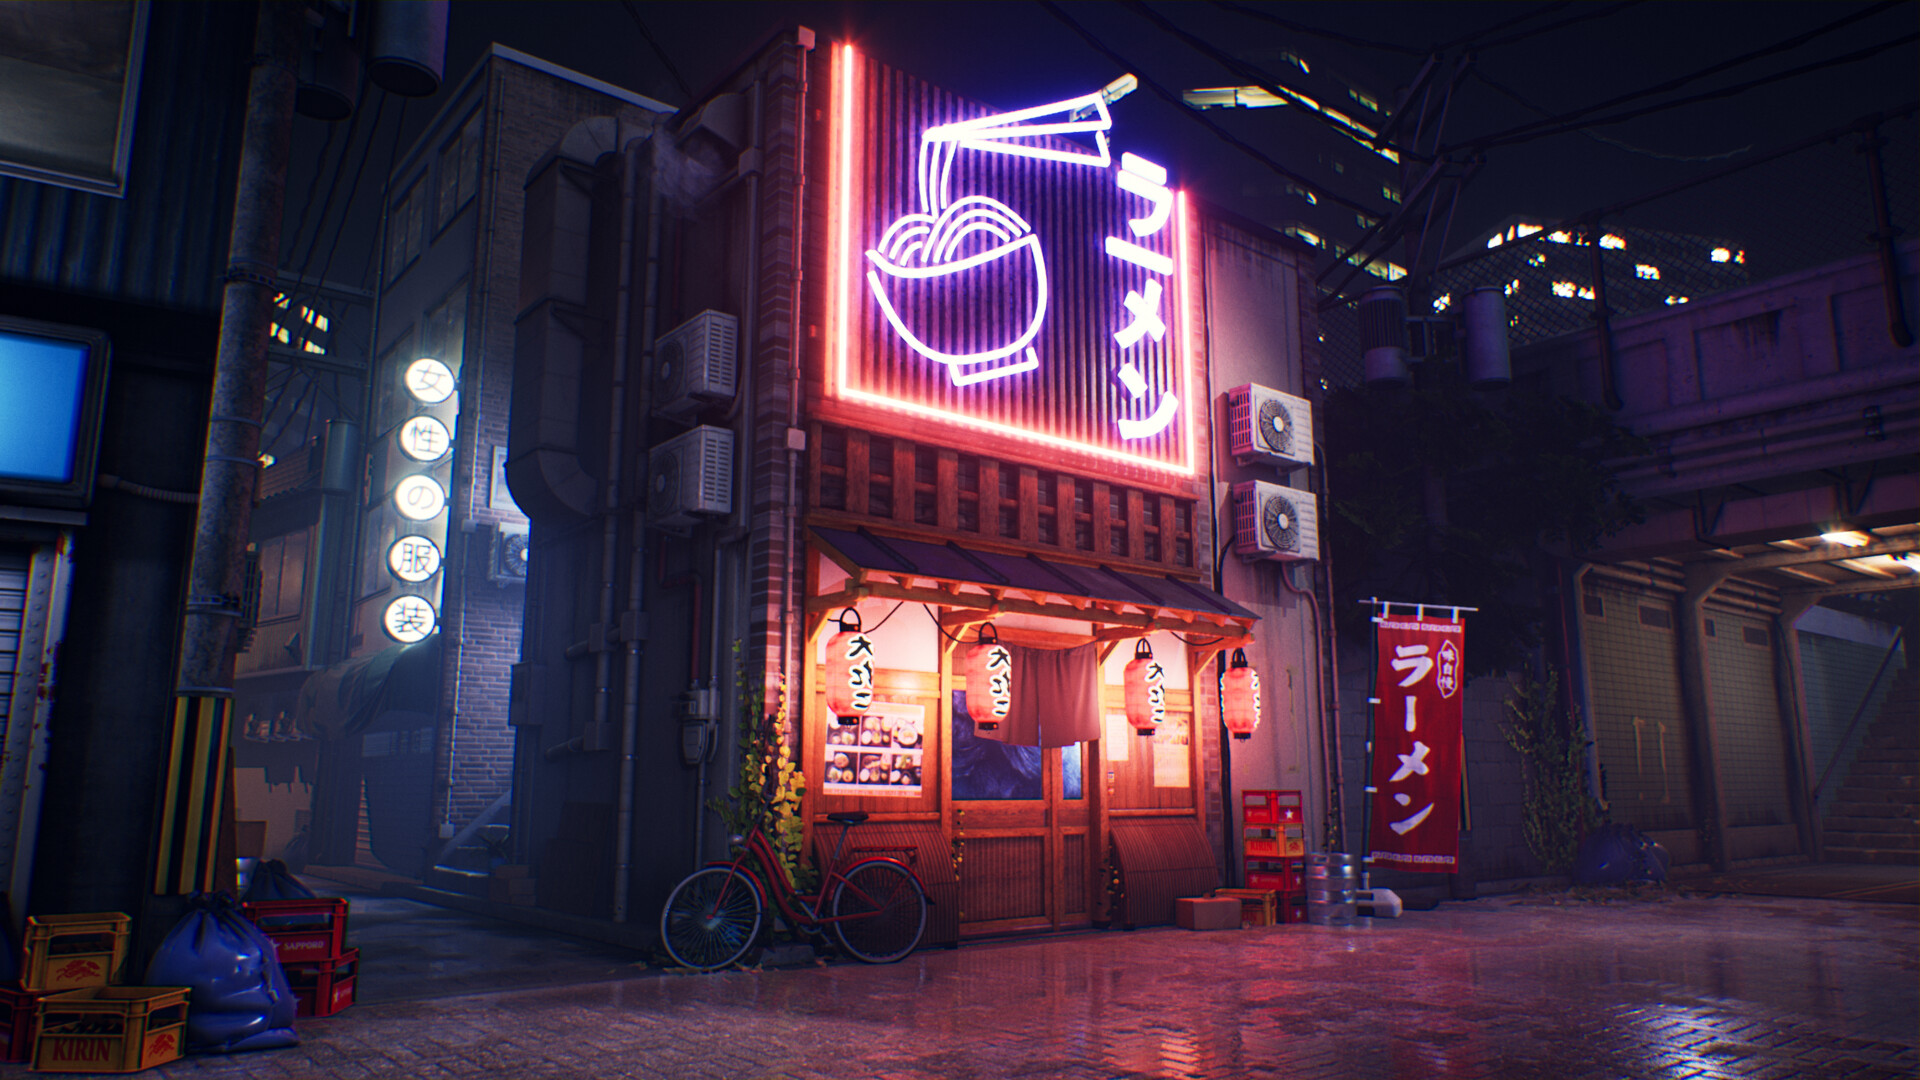 Cafe Japan Neon Glowing Bicycle Store Front Building City Street 1920x1080